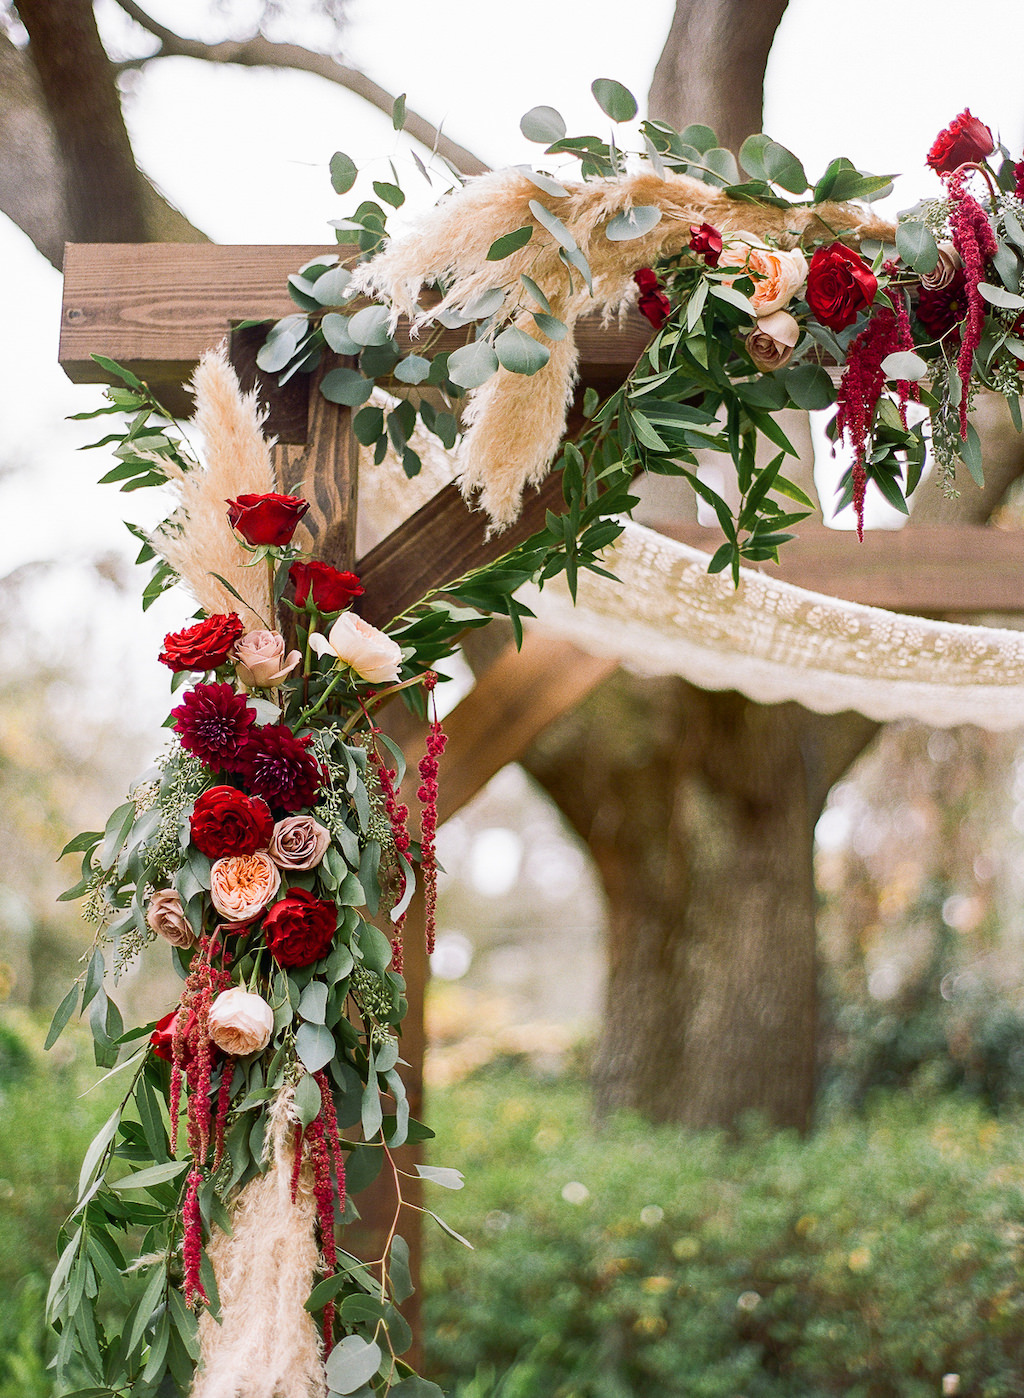 Boho Chic Inspired Outdoor Lakeland Florida Wedding Ceremony Decor, Wooden Arch with Red, Ivory, Pink and Greenery Organic Floral Decor and Ceremony Table